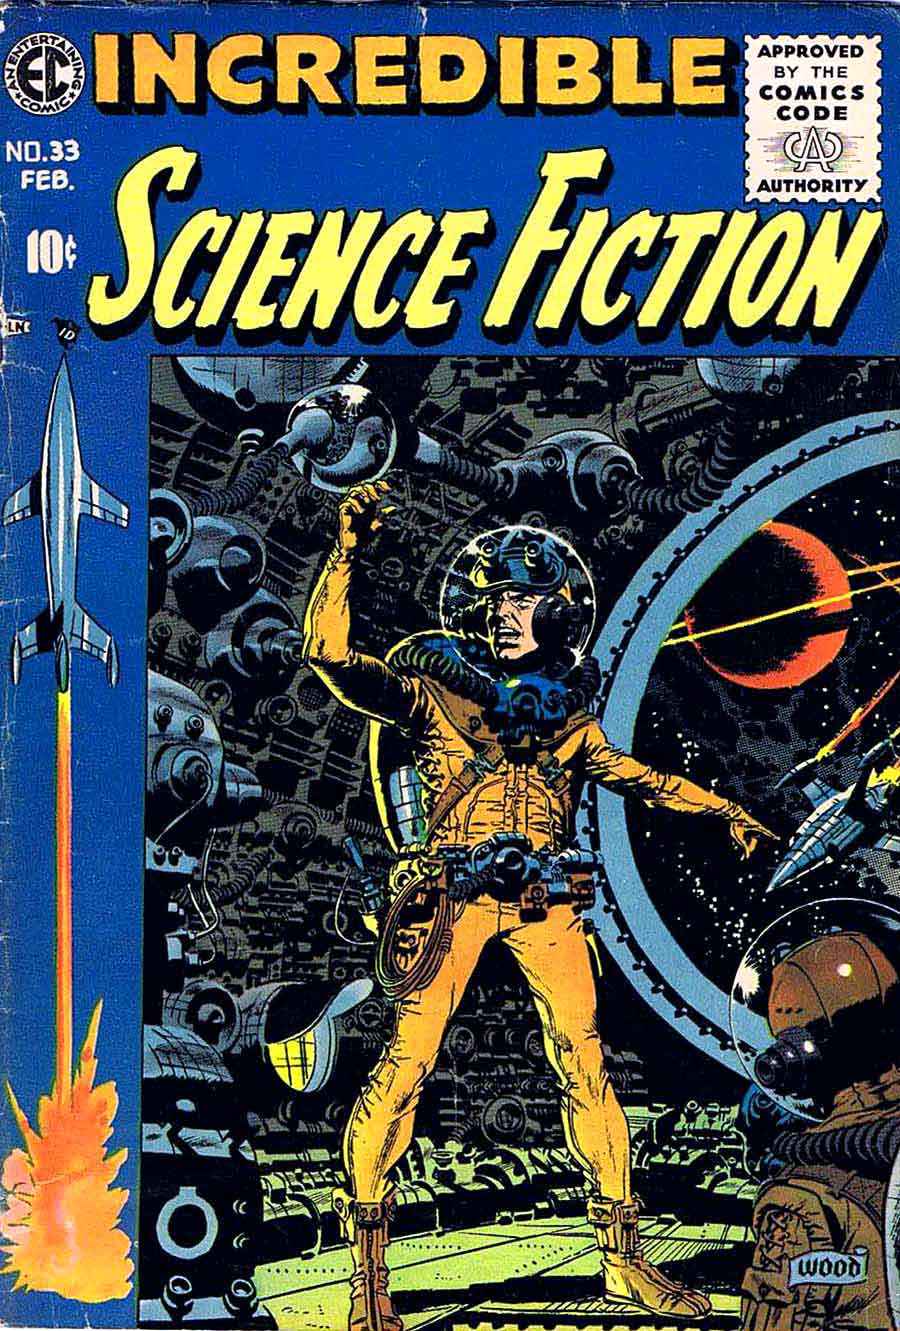 Incredible Science Fiction v1 #33 ec comic book cover art by Wally Wood